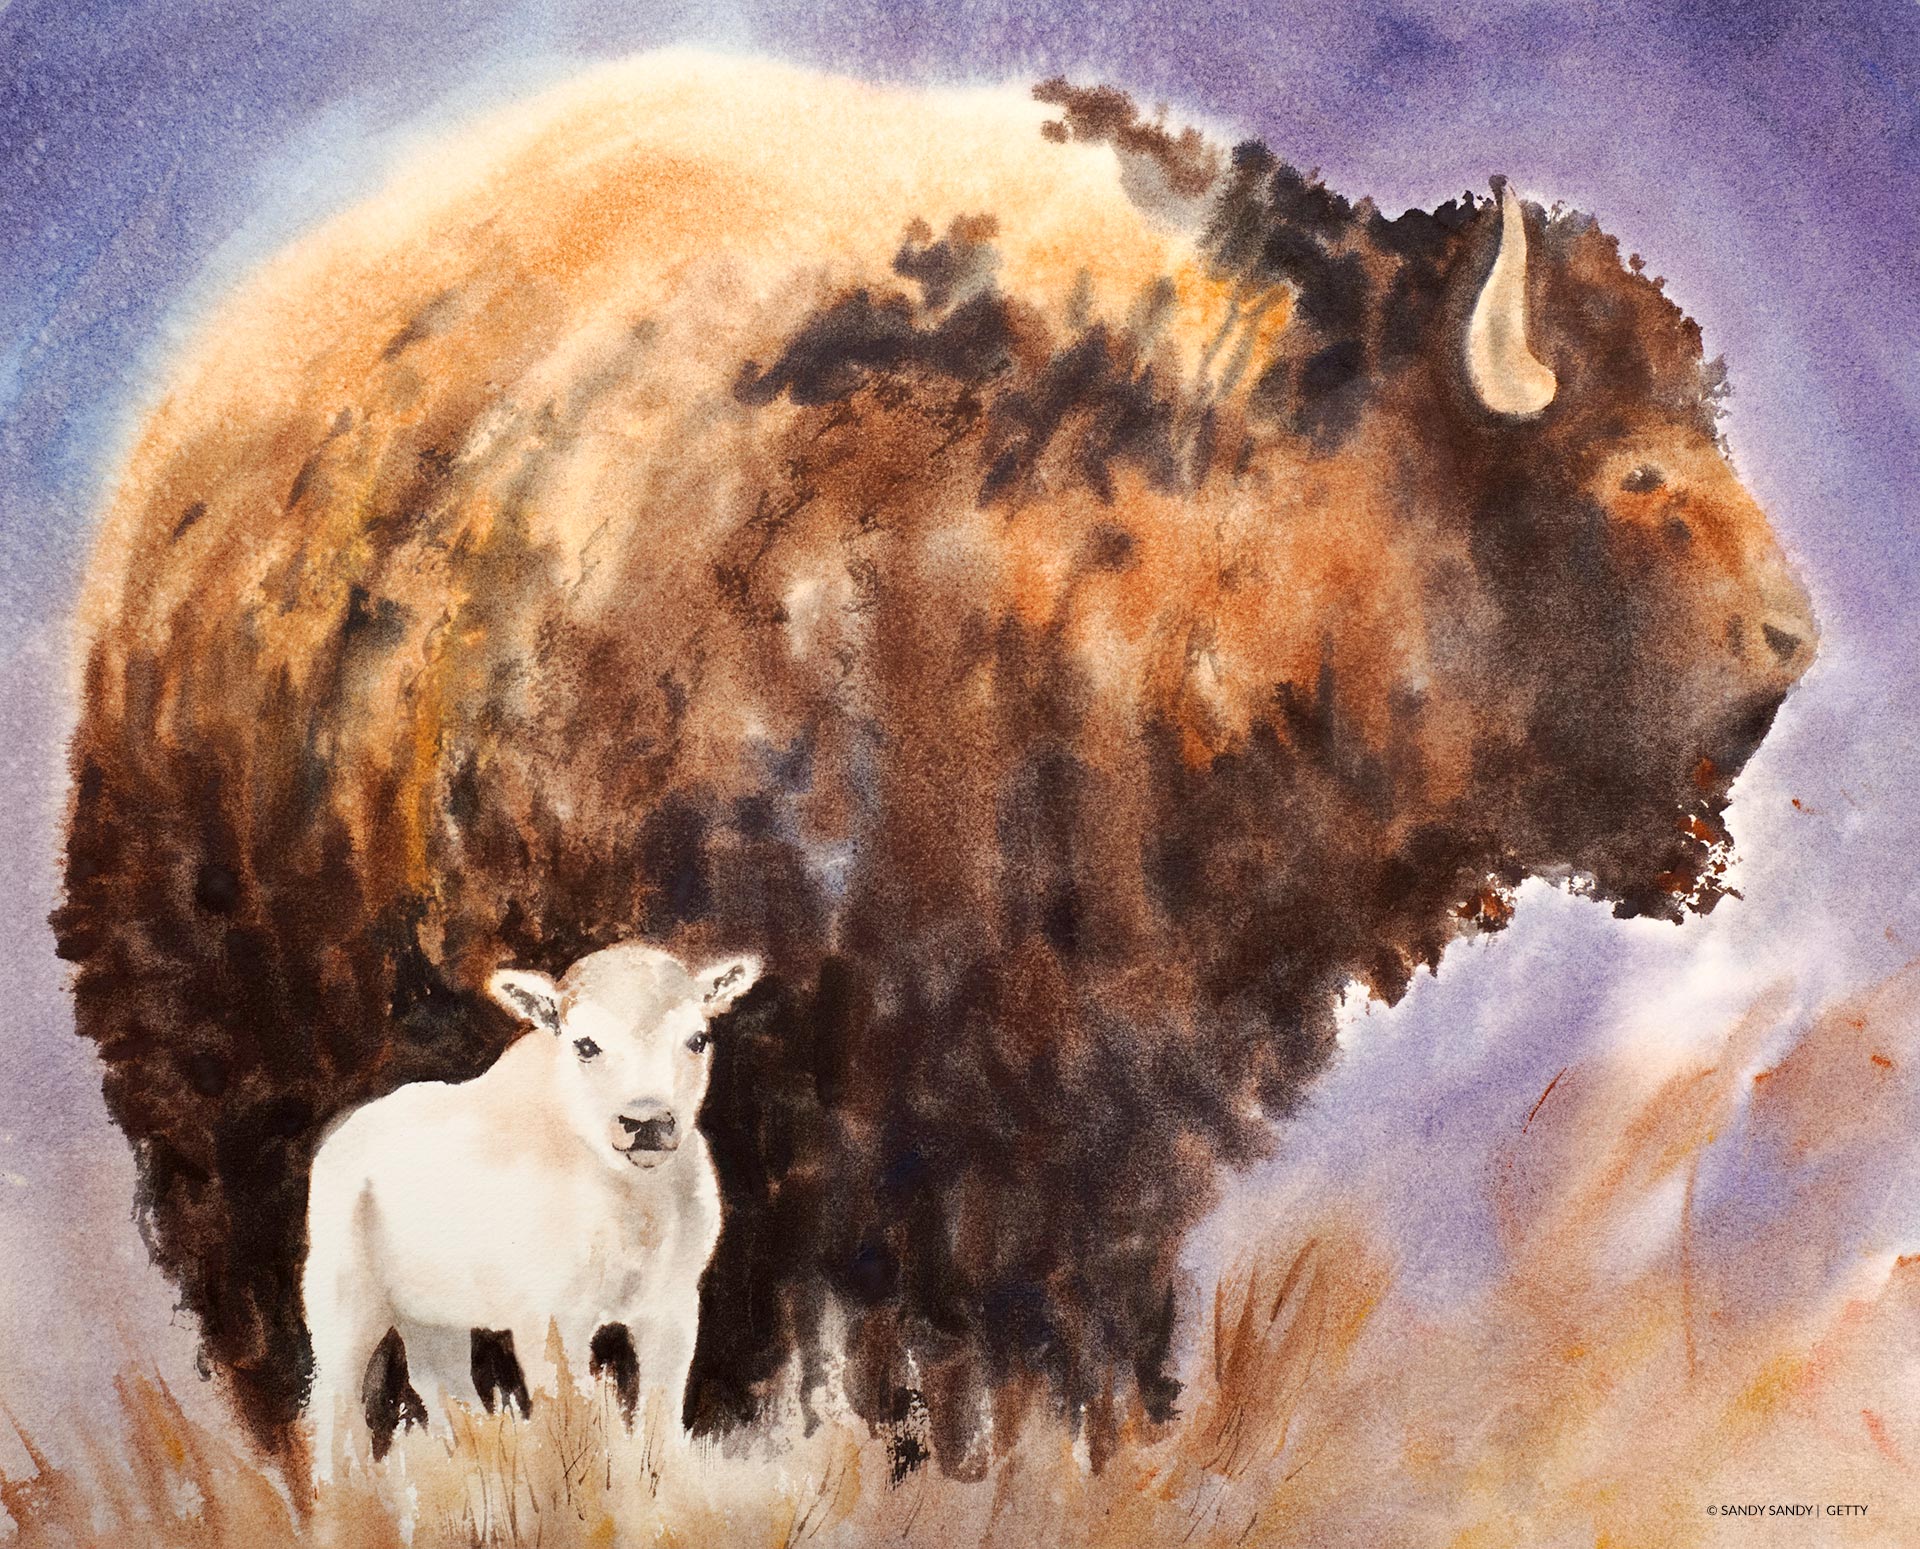 The story of the white bison calf. Illustration by Sandy Sandy.